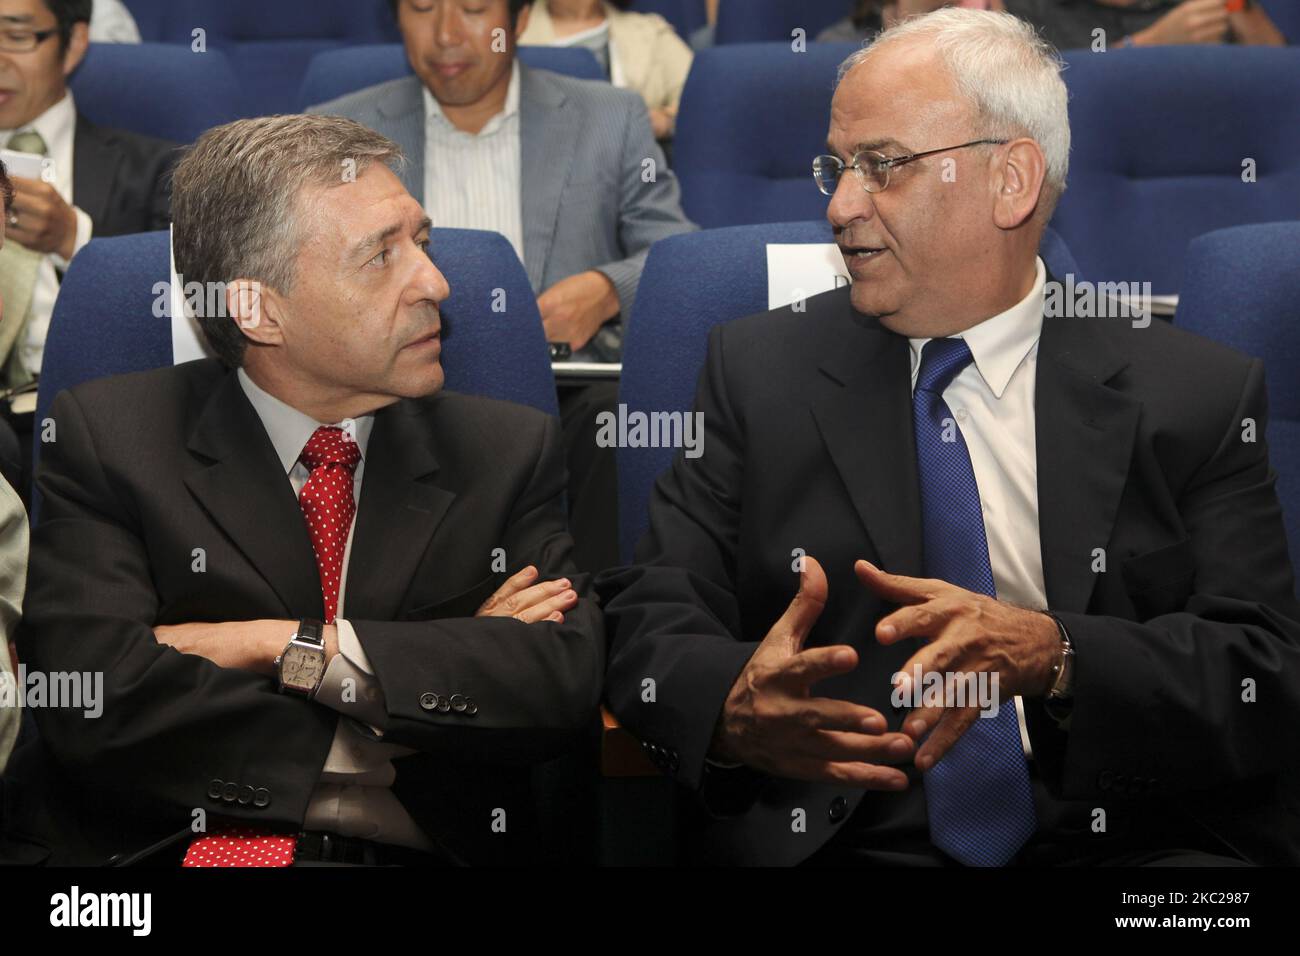 Senior Palestinian politician and diplomat and top PLO official Saeb Erekat (right) talking with former Israeli government minister Yossi Beilin at a conference organized by the Geneva Initiative organization in Tel Aviv, Israel, on 16 May, 2011. Senior Palestinian politician and diplomat and top PLO official Saeb Erekat is in critical condition with COVID-19 after he was hospitalized at Israel's Hadassah Medical Center in Jerusalem on Sunday, 18 October, 2020. (Photo by Mati Milstein/NurPhoto) Stock Photo